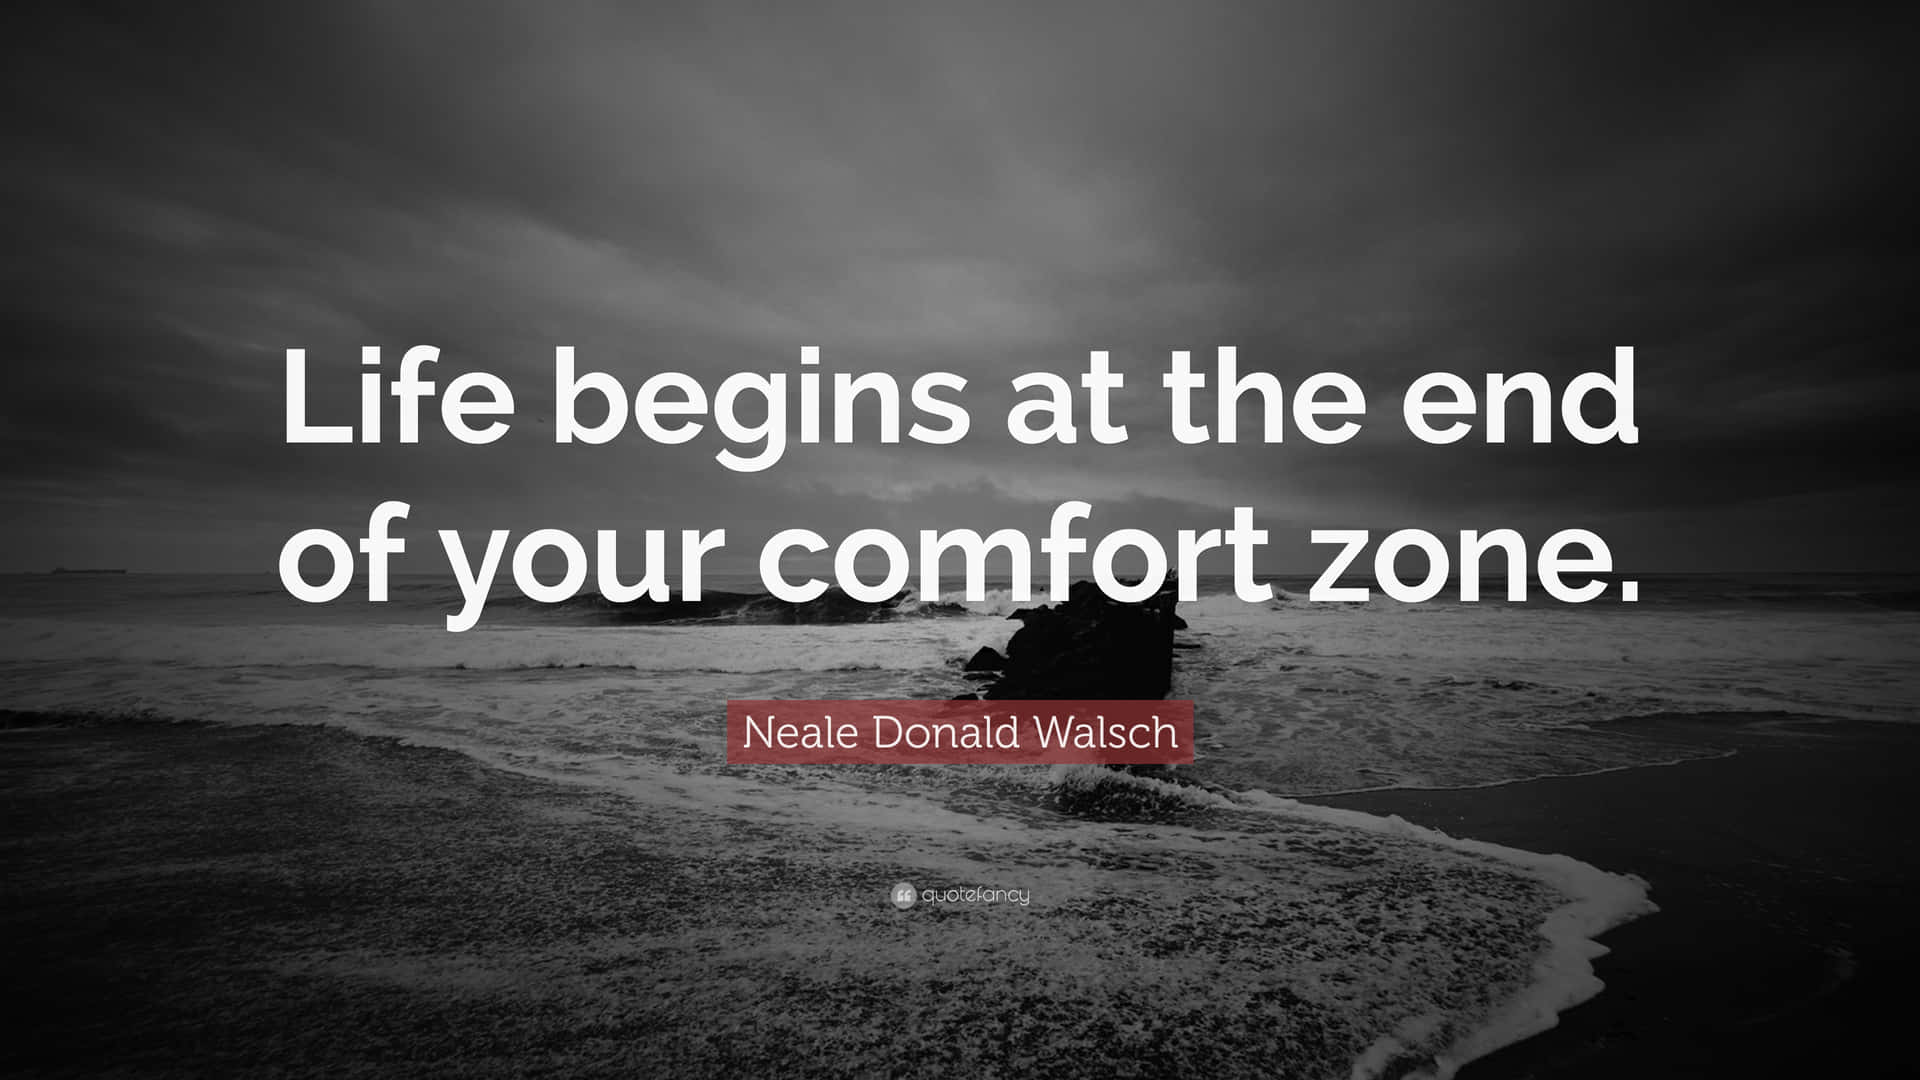 Life Begins At The End Of Your Comfort Zone Wallpaper